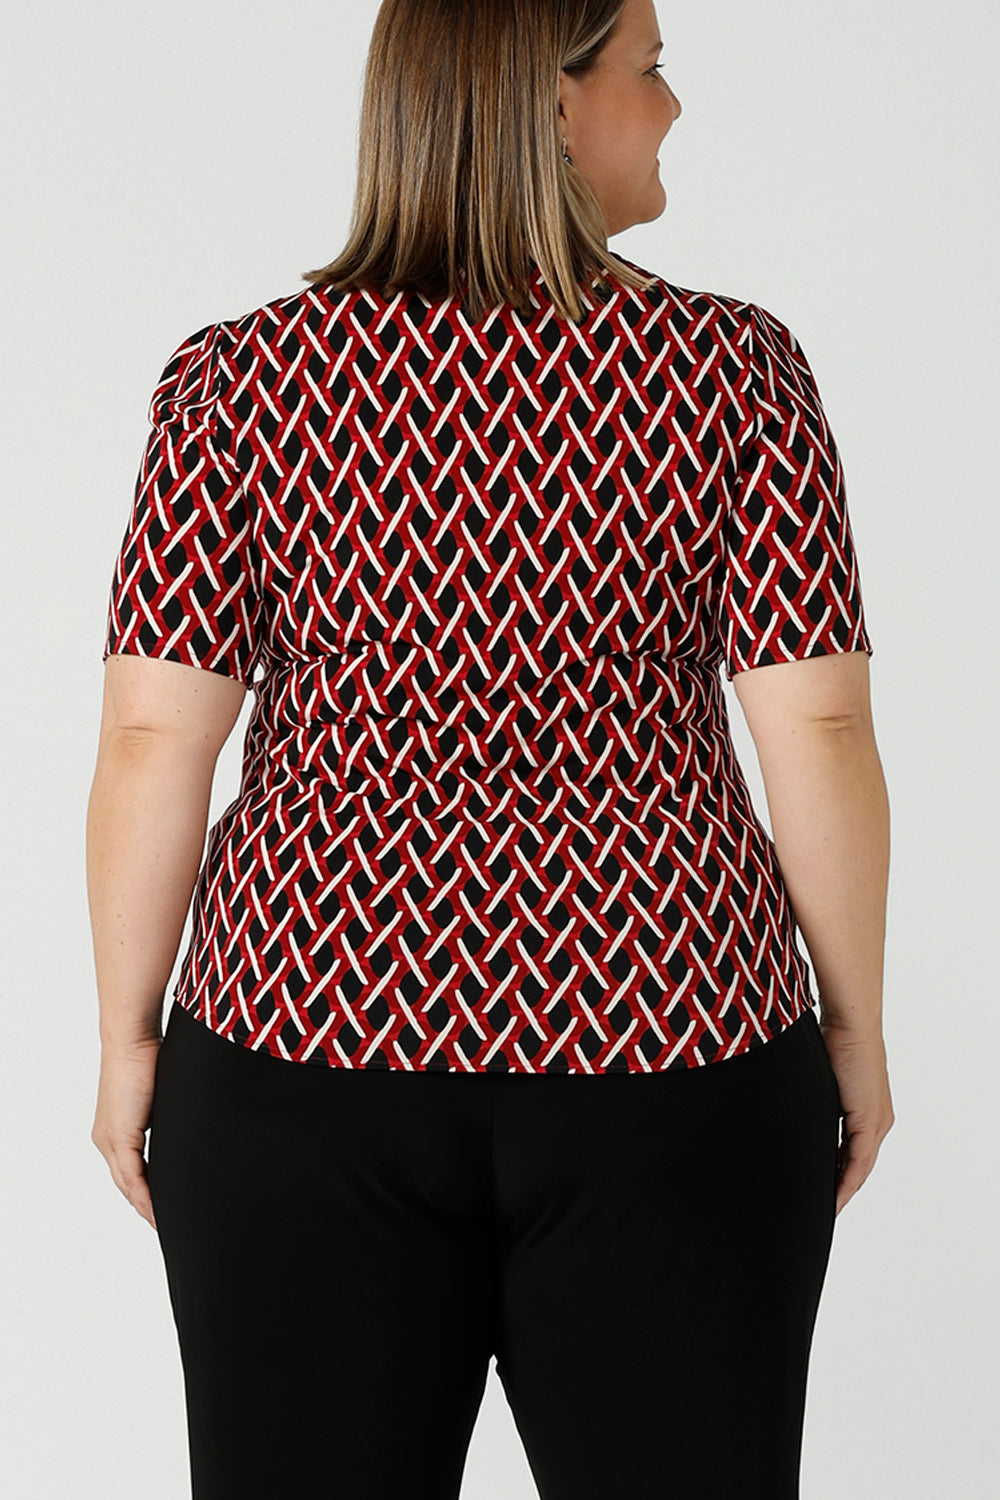 Back view of curvy size 16 woman wears a geometric Chevron print Berni top. Corporate causal work wear top that is comfortable and versatile. Styled back with Black Indi pants. Made in Australia for women size 8 - 24.